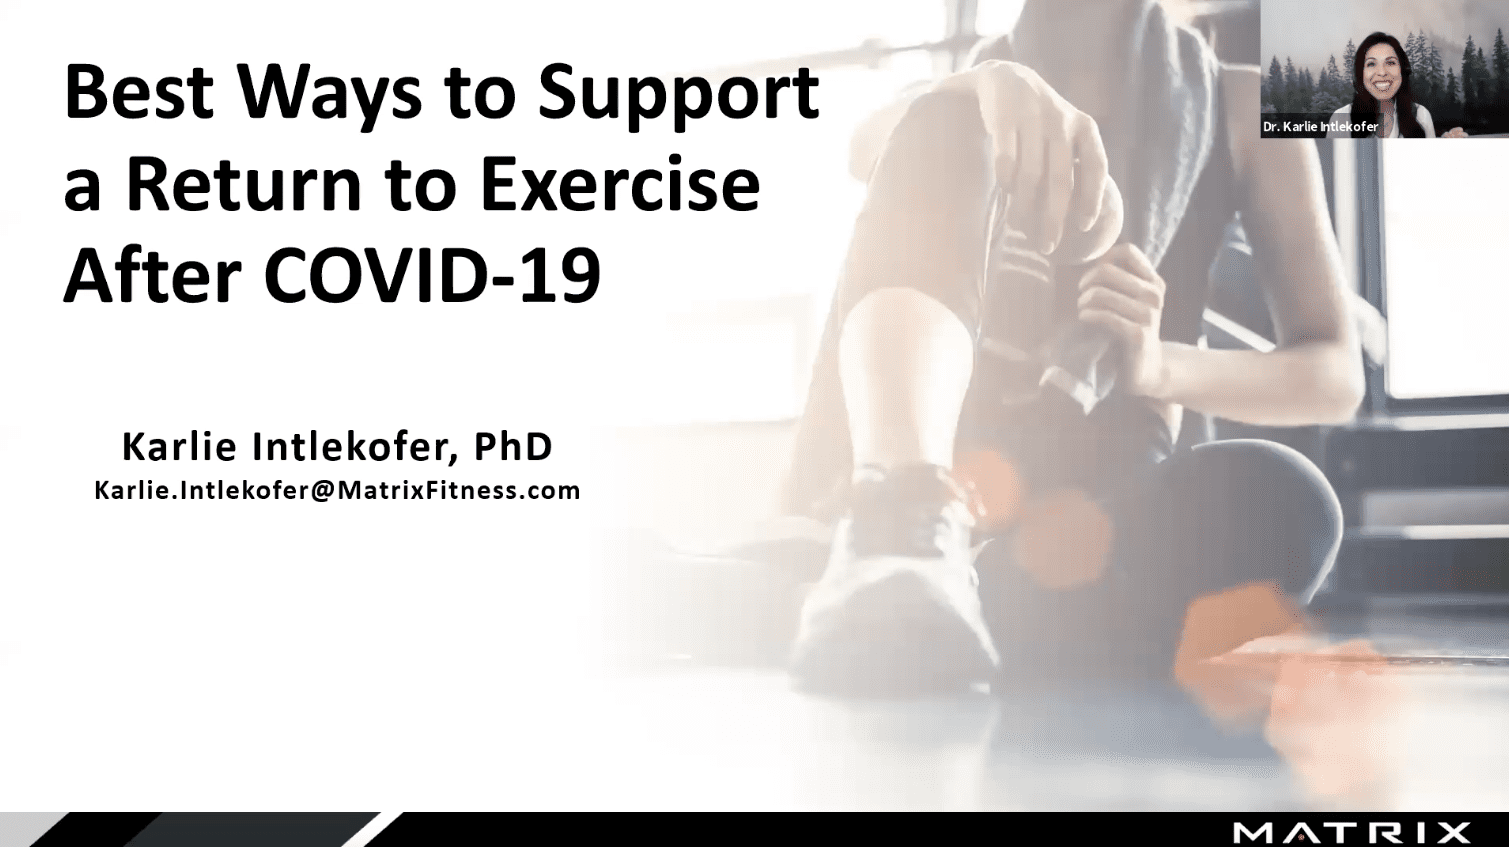 Exercise after COVID-19